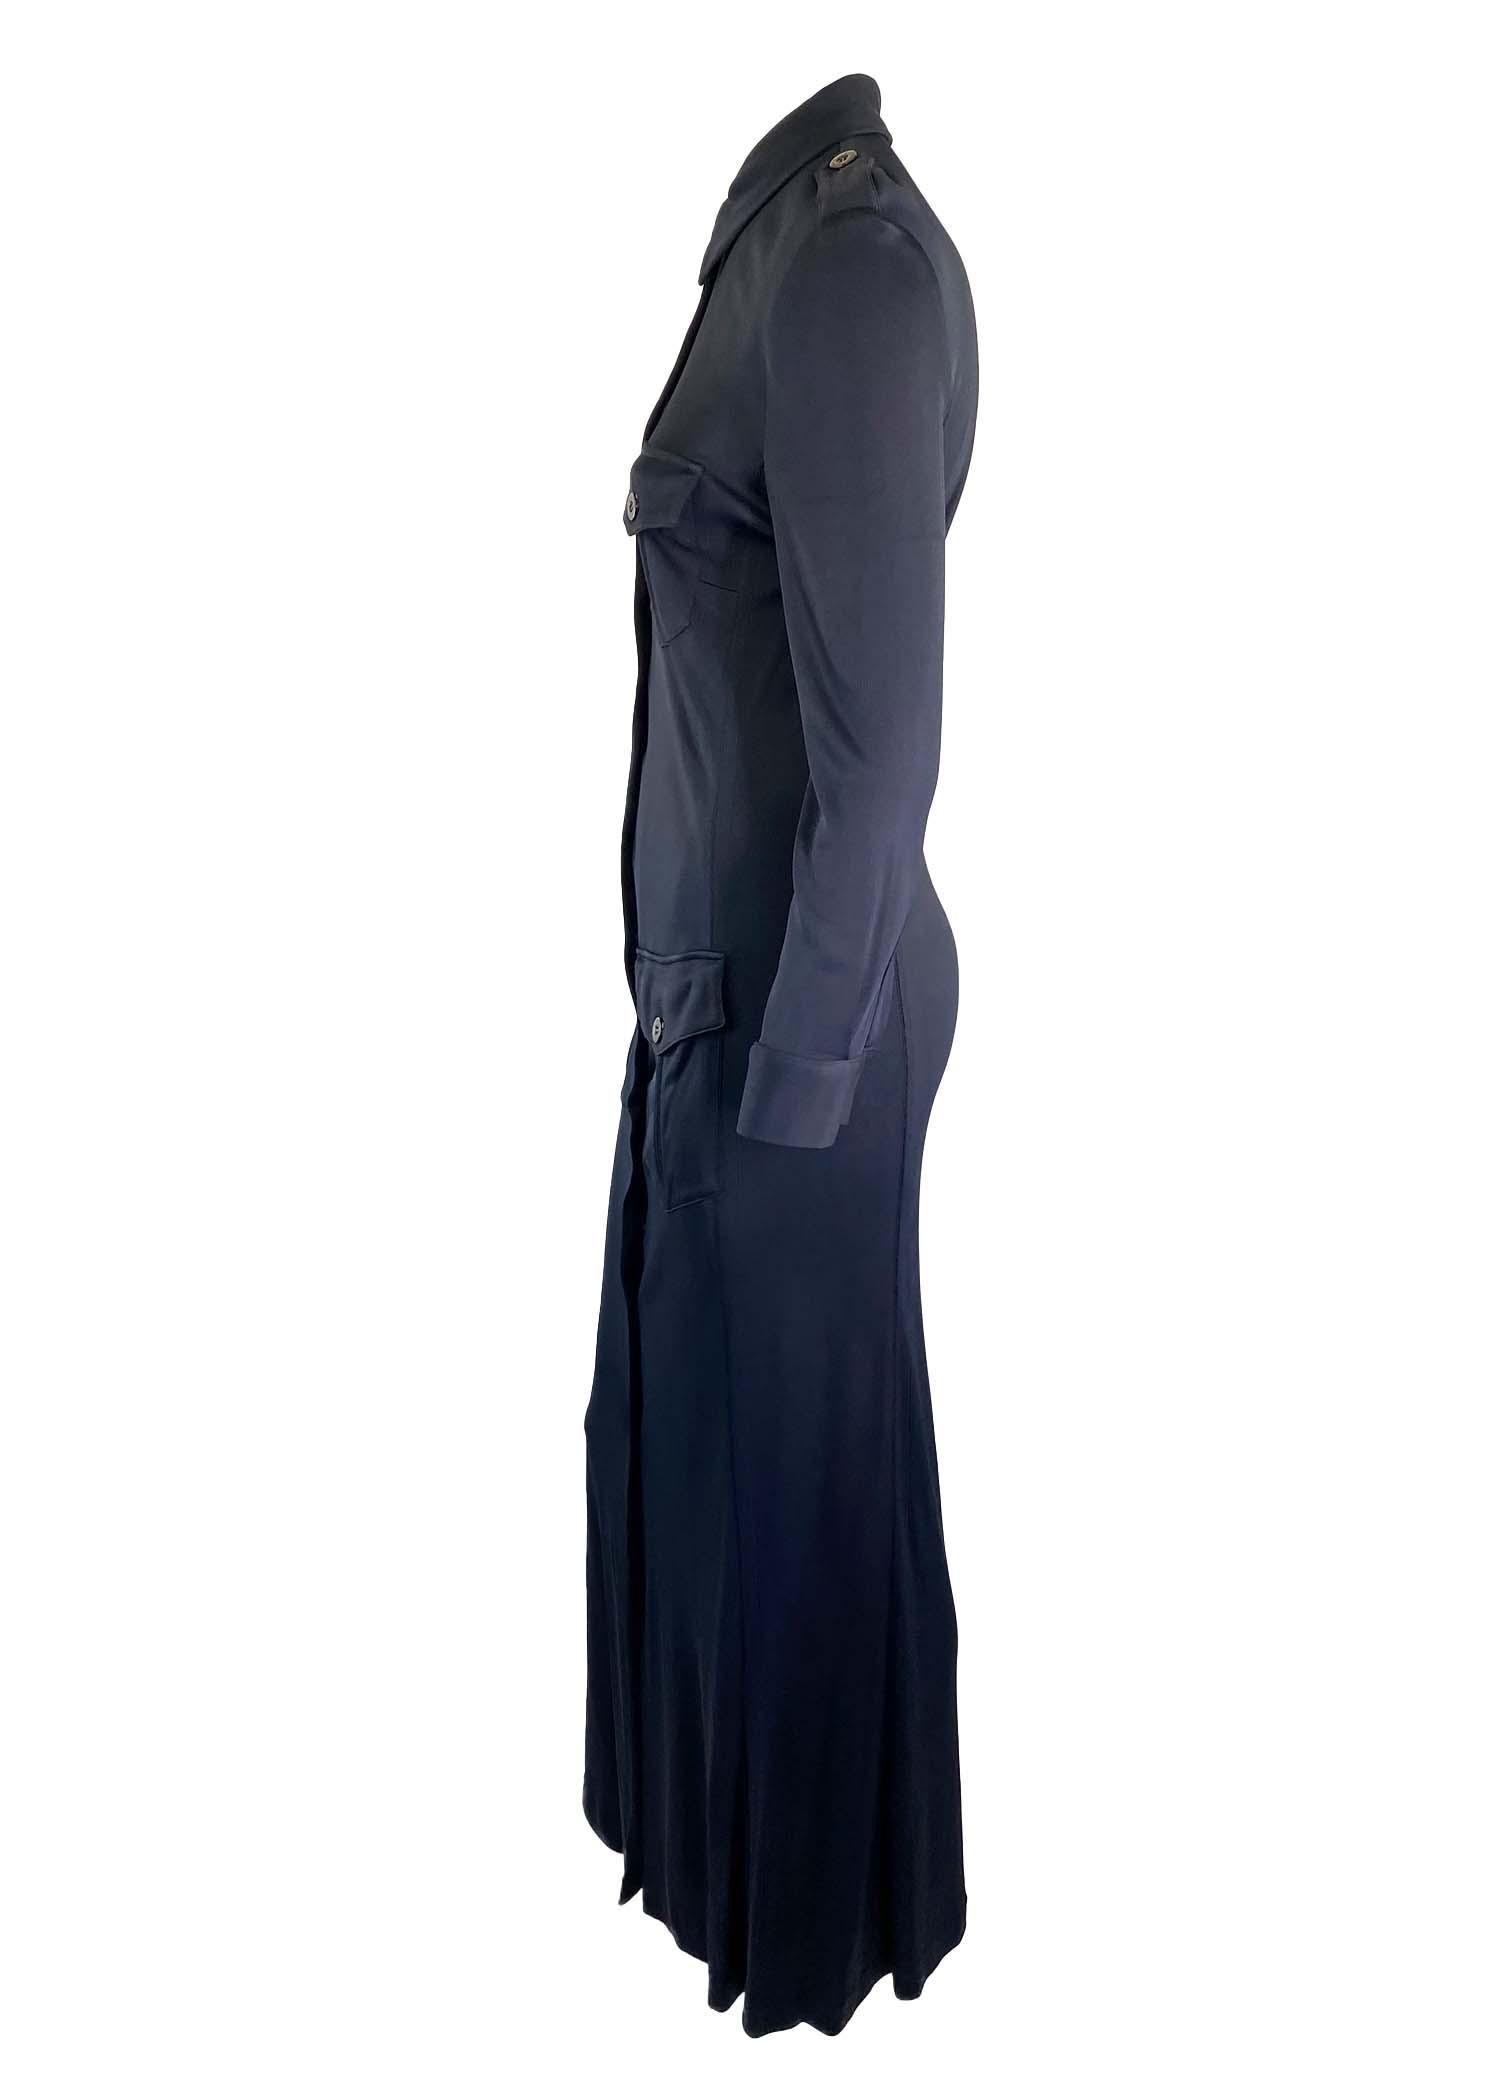 S/S 1996 Gucci by Tom Ford Nicole Kidman Navy Viscose Maxi Dress with Tie  For Sale 1